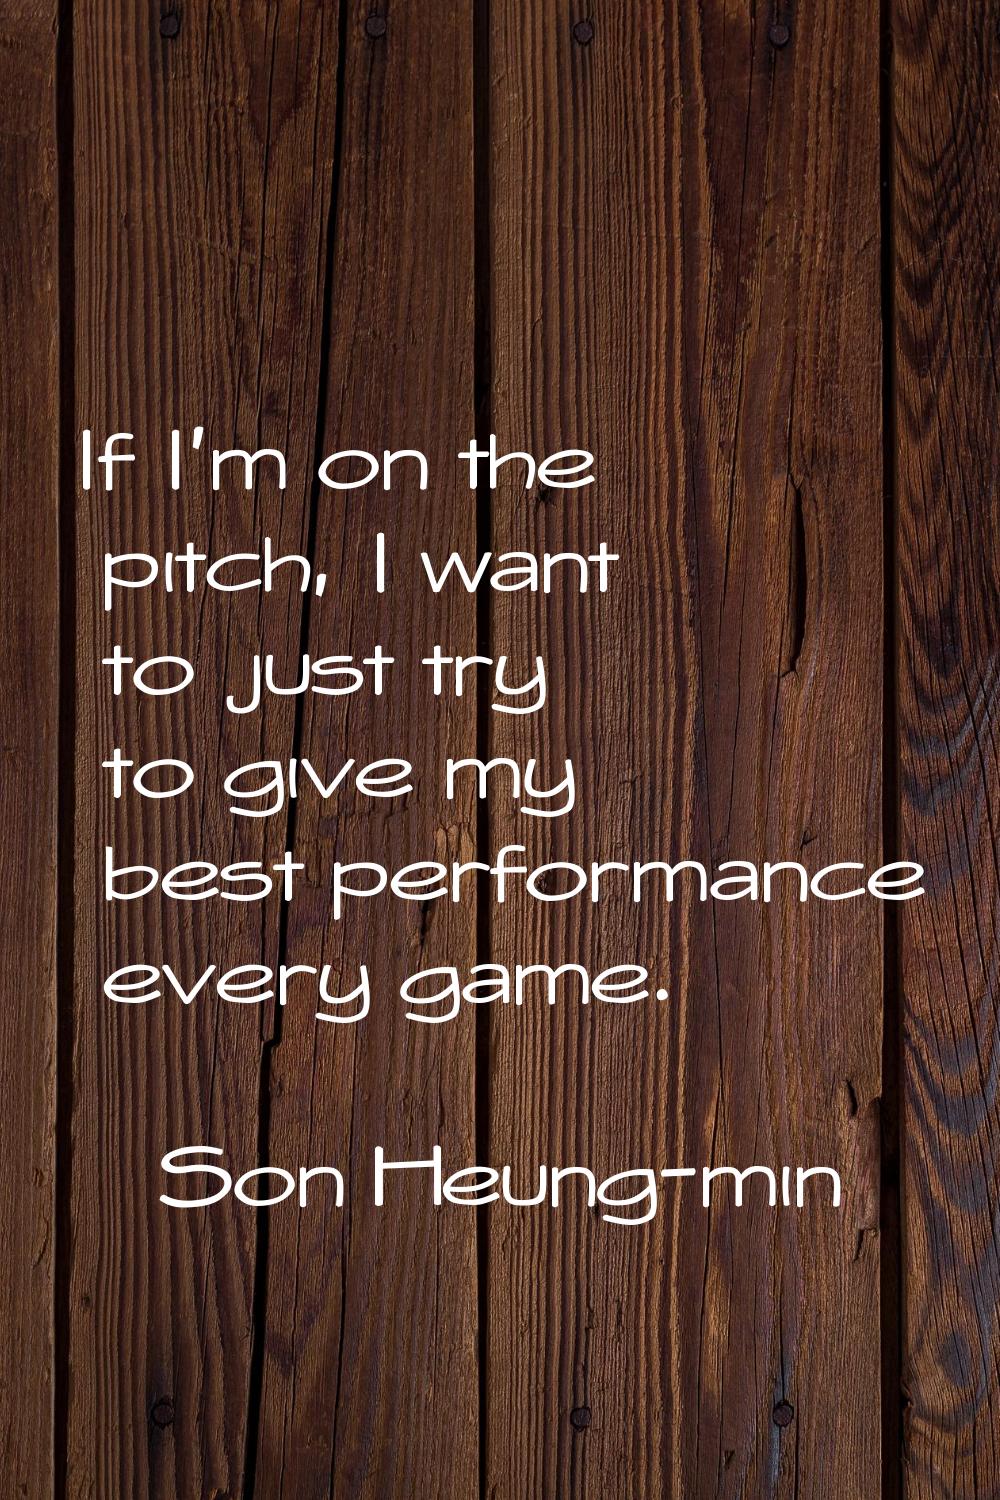 If I'm on the pitch, I want to just try to give my best performance every game.